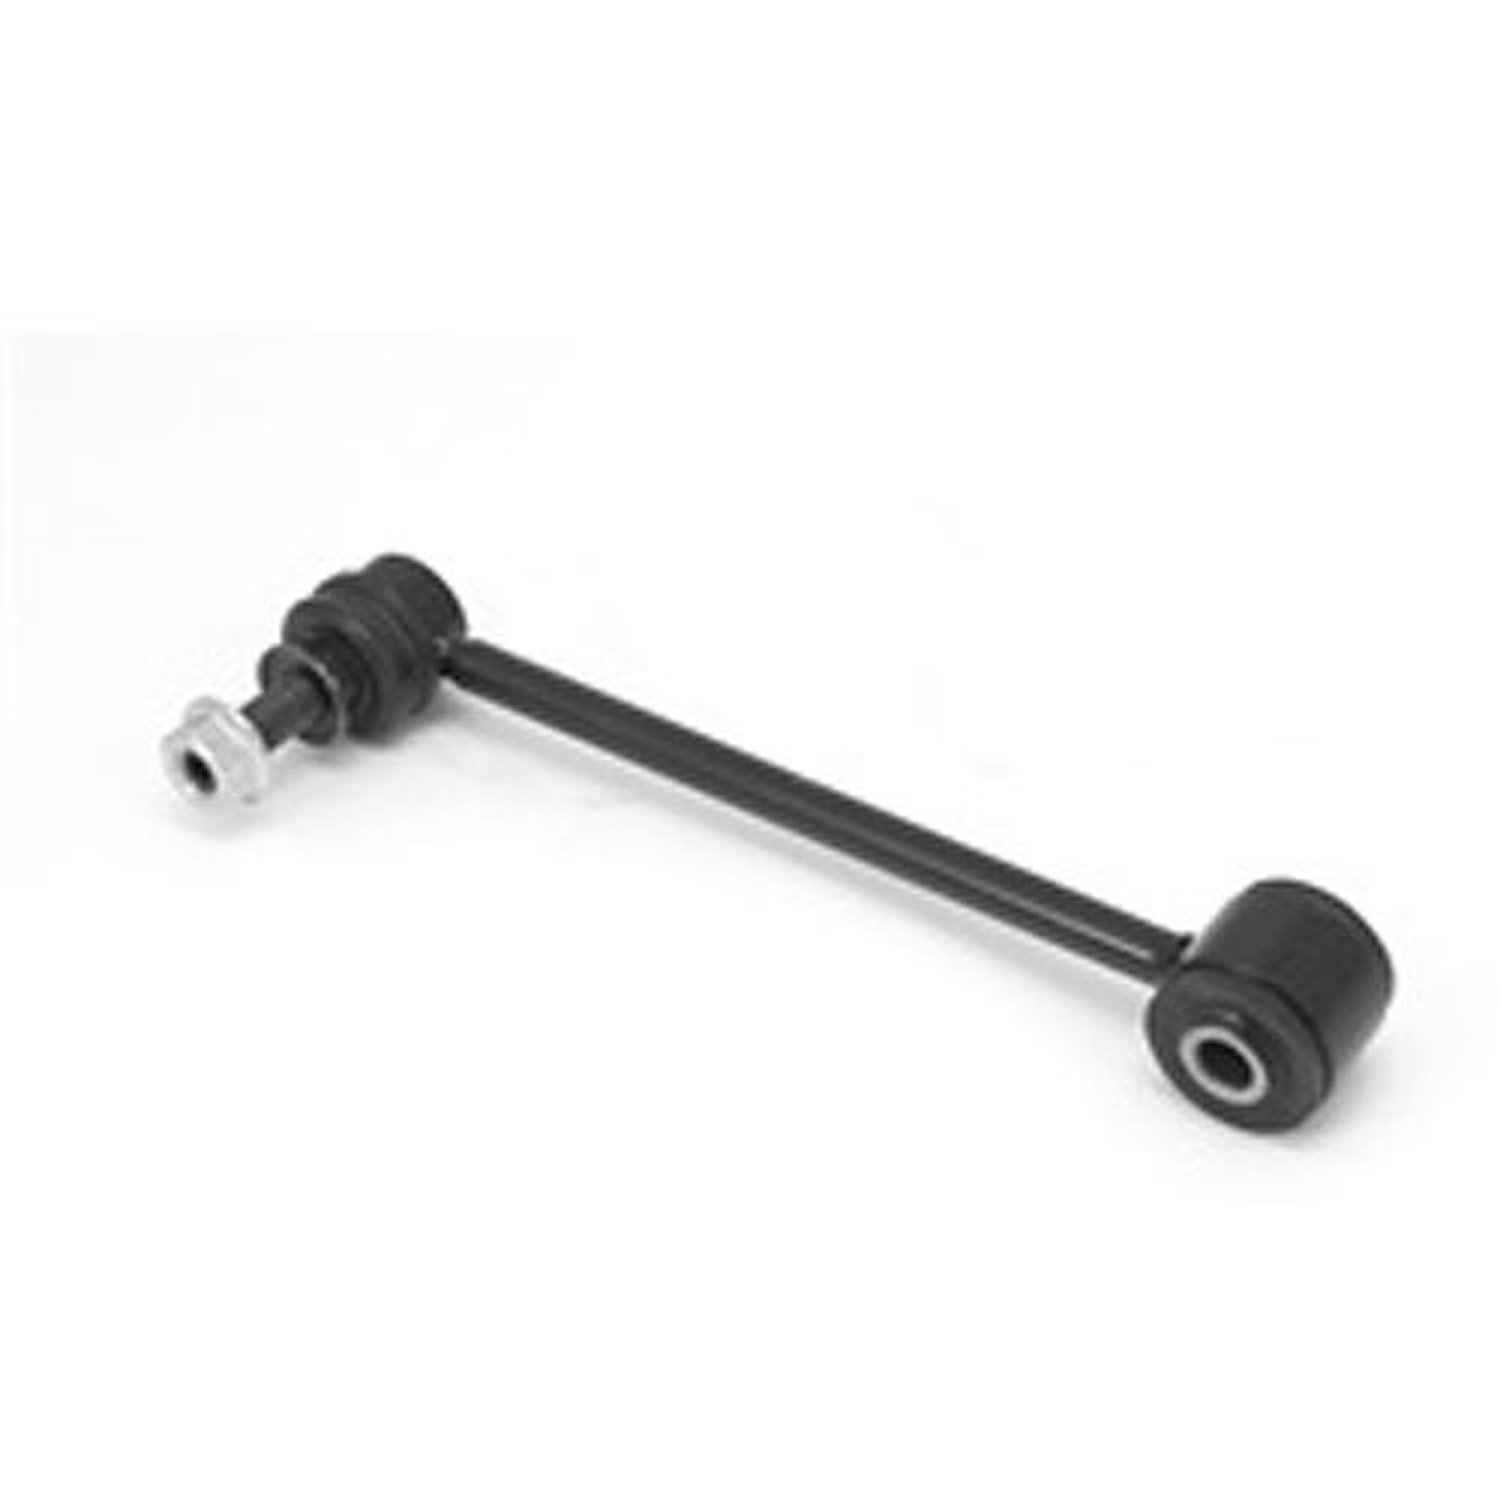 Replacement rear sway bar end link from Omix-ADA, Fits 07-12 Jeep Wrangler JK